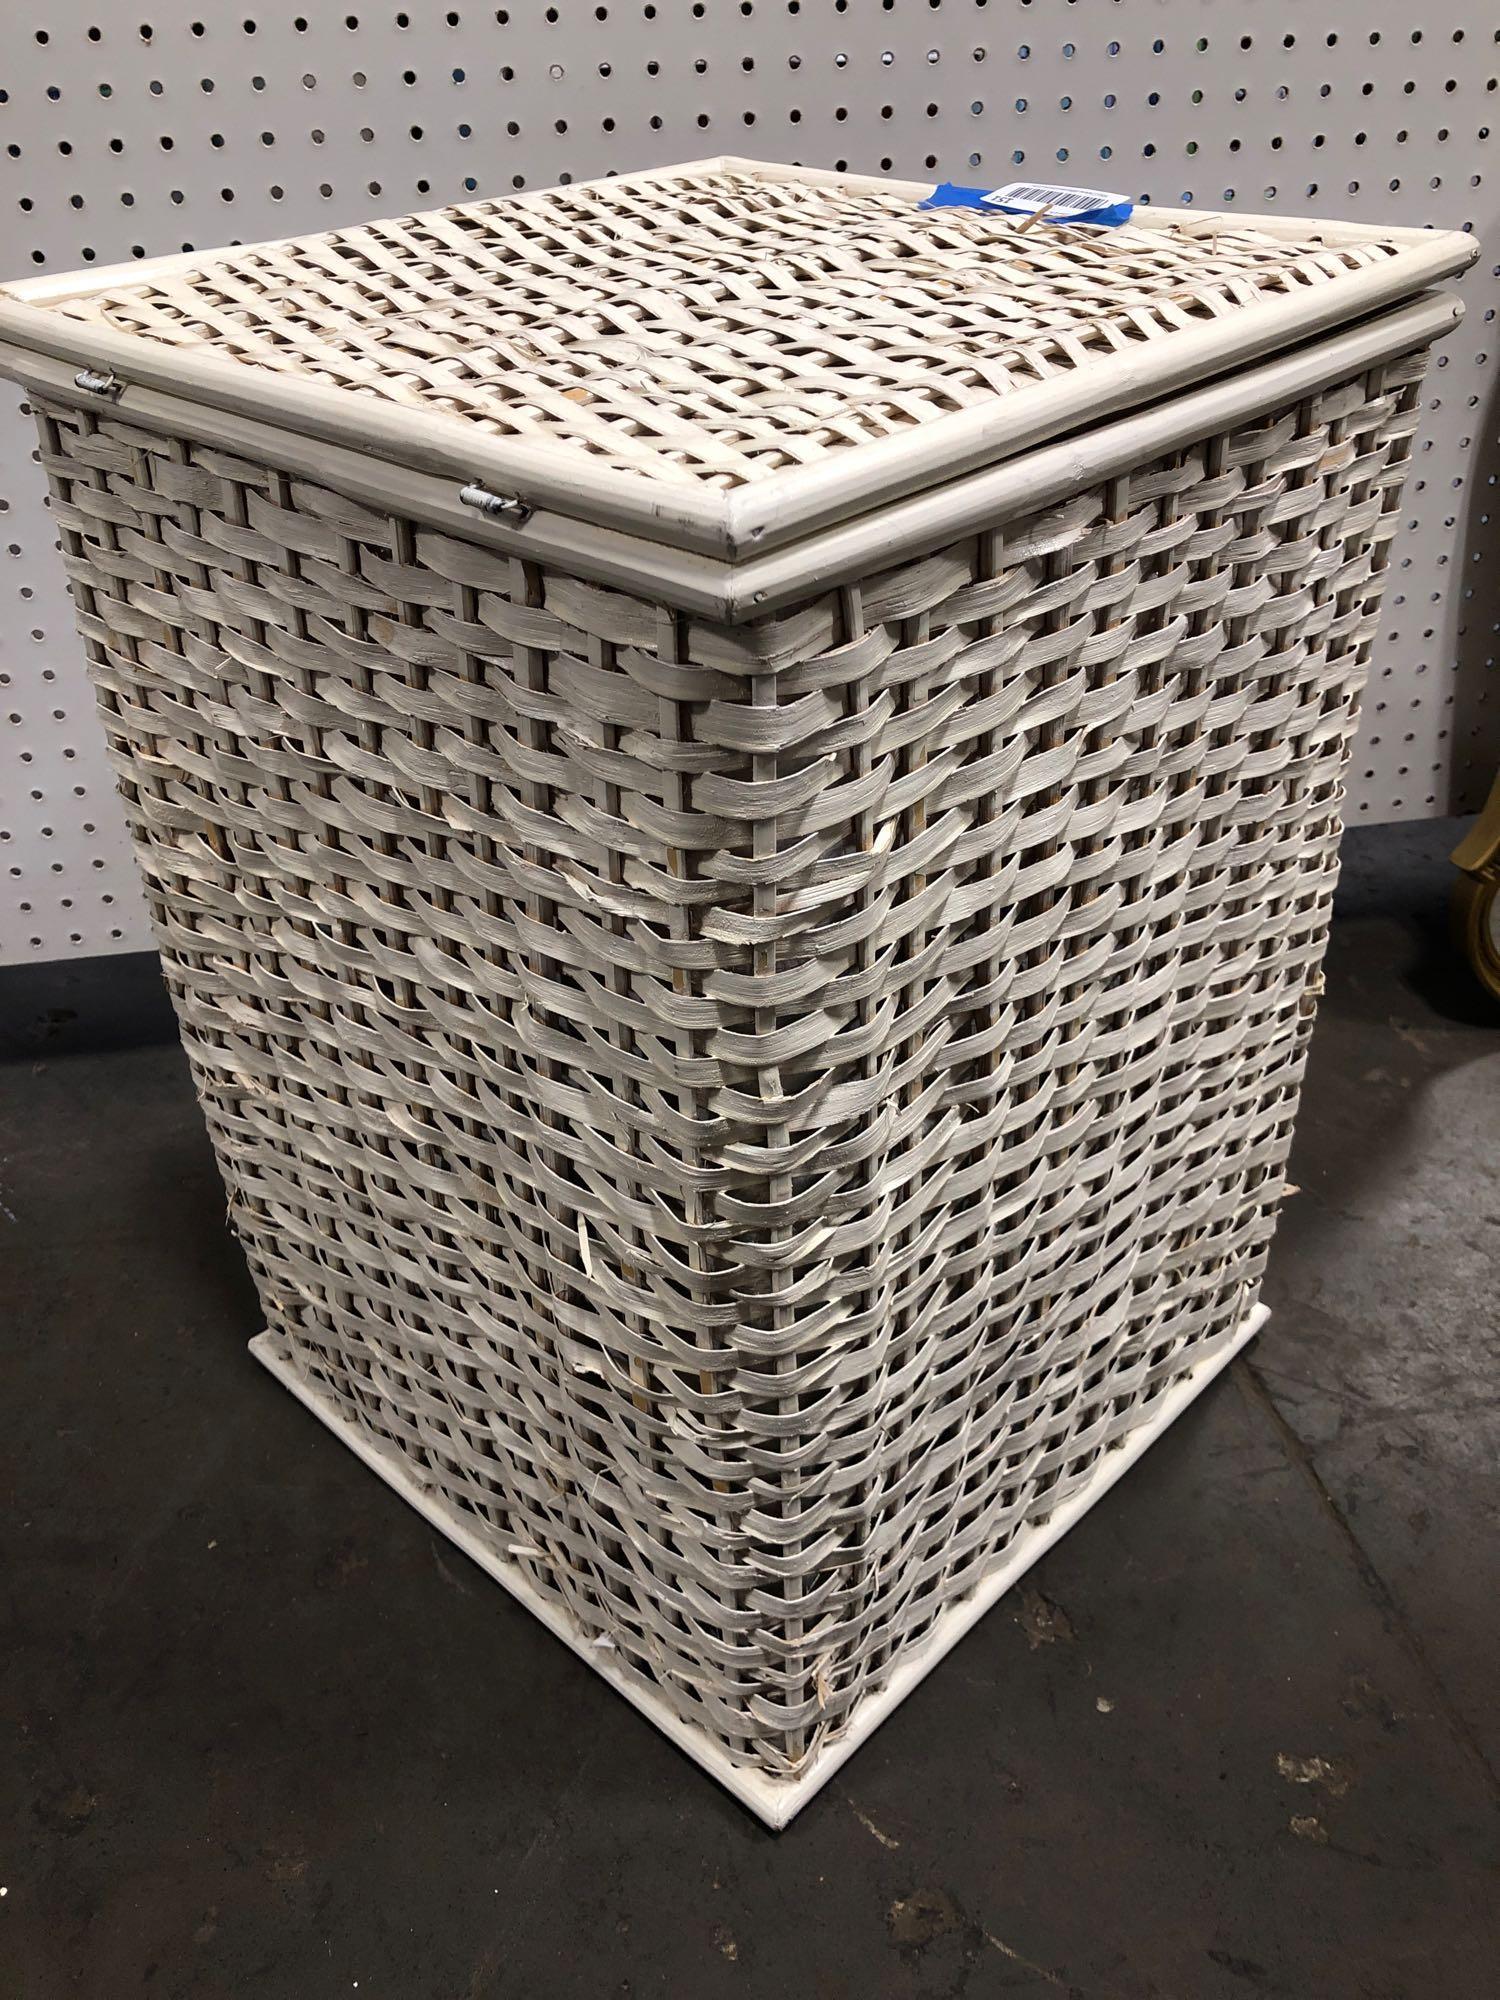 Wicker storage container with puzzles